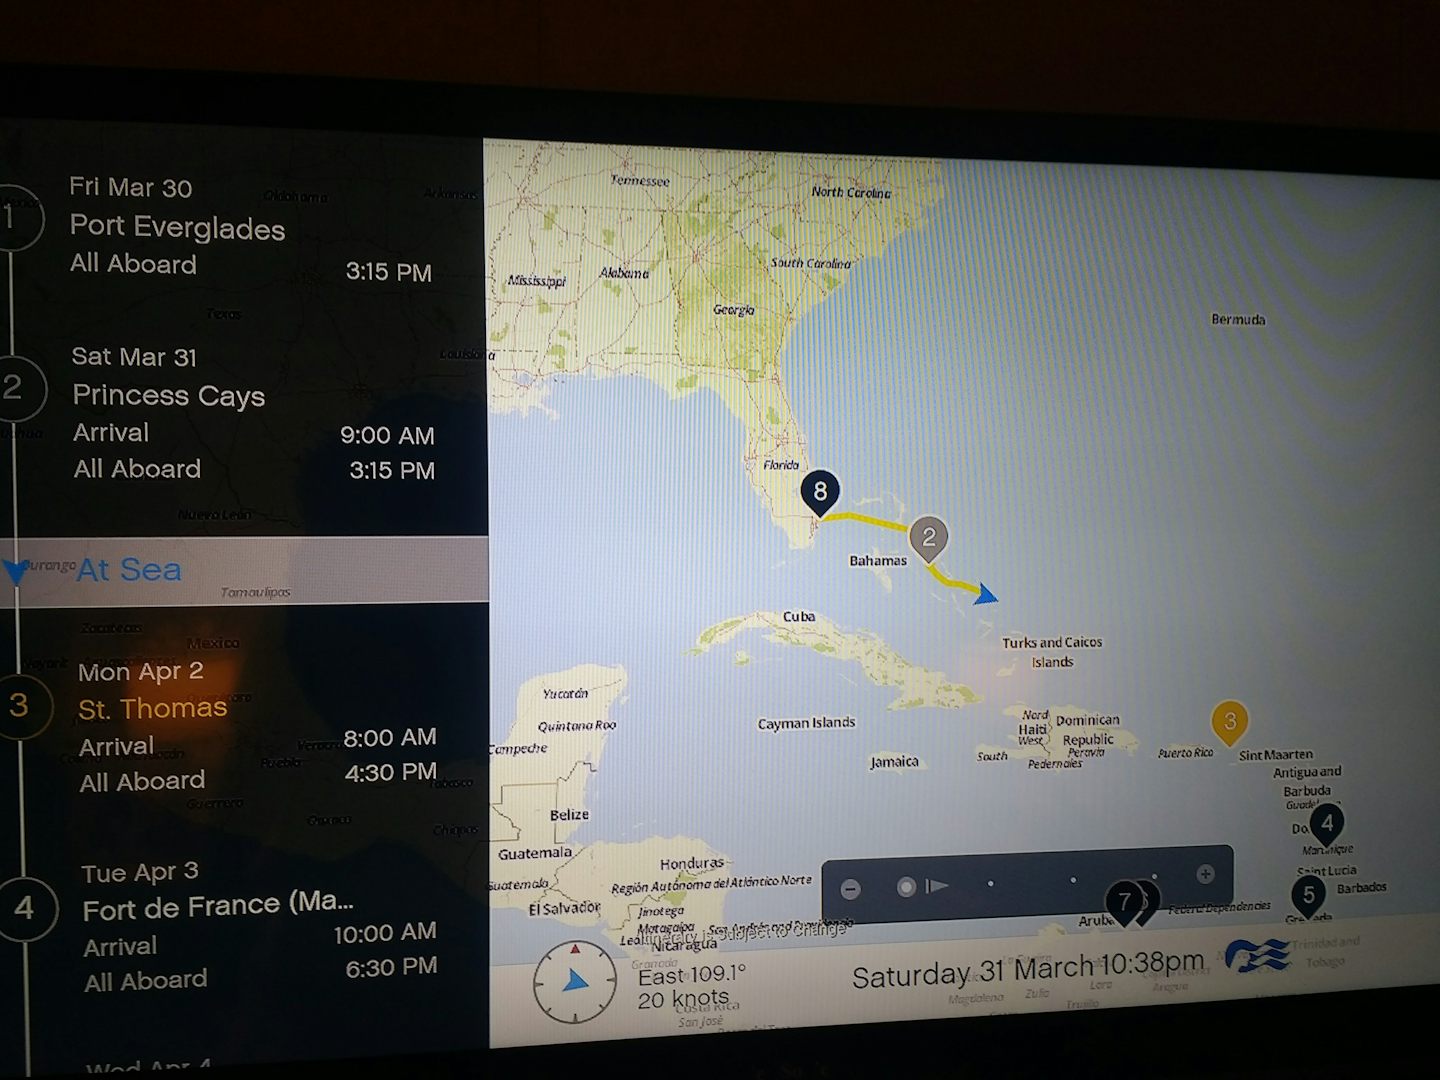 Loved the interactive TV.  Here is the ship tracking feature